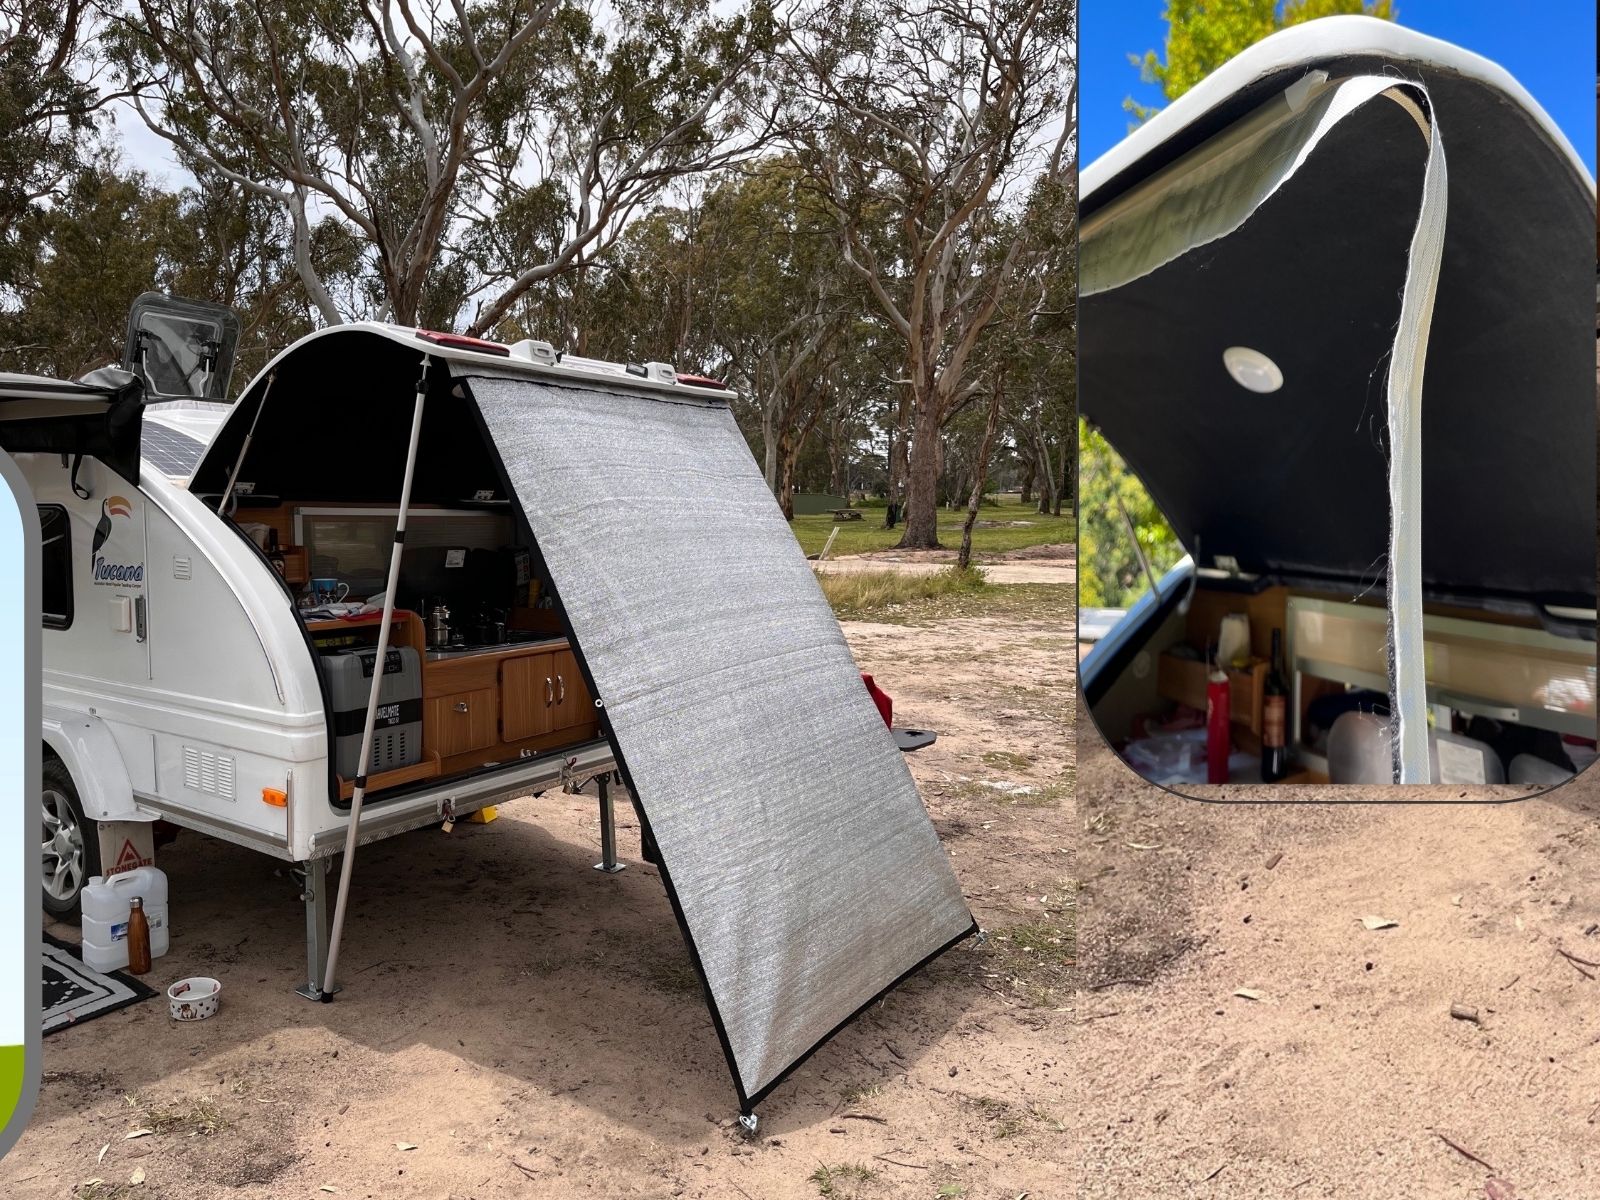 Feeding in the track for the kitchen shade on a Tacana Teardrop camper